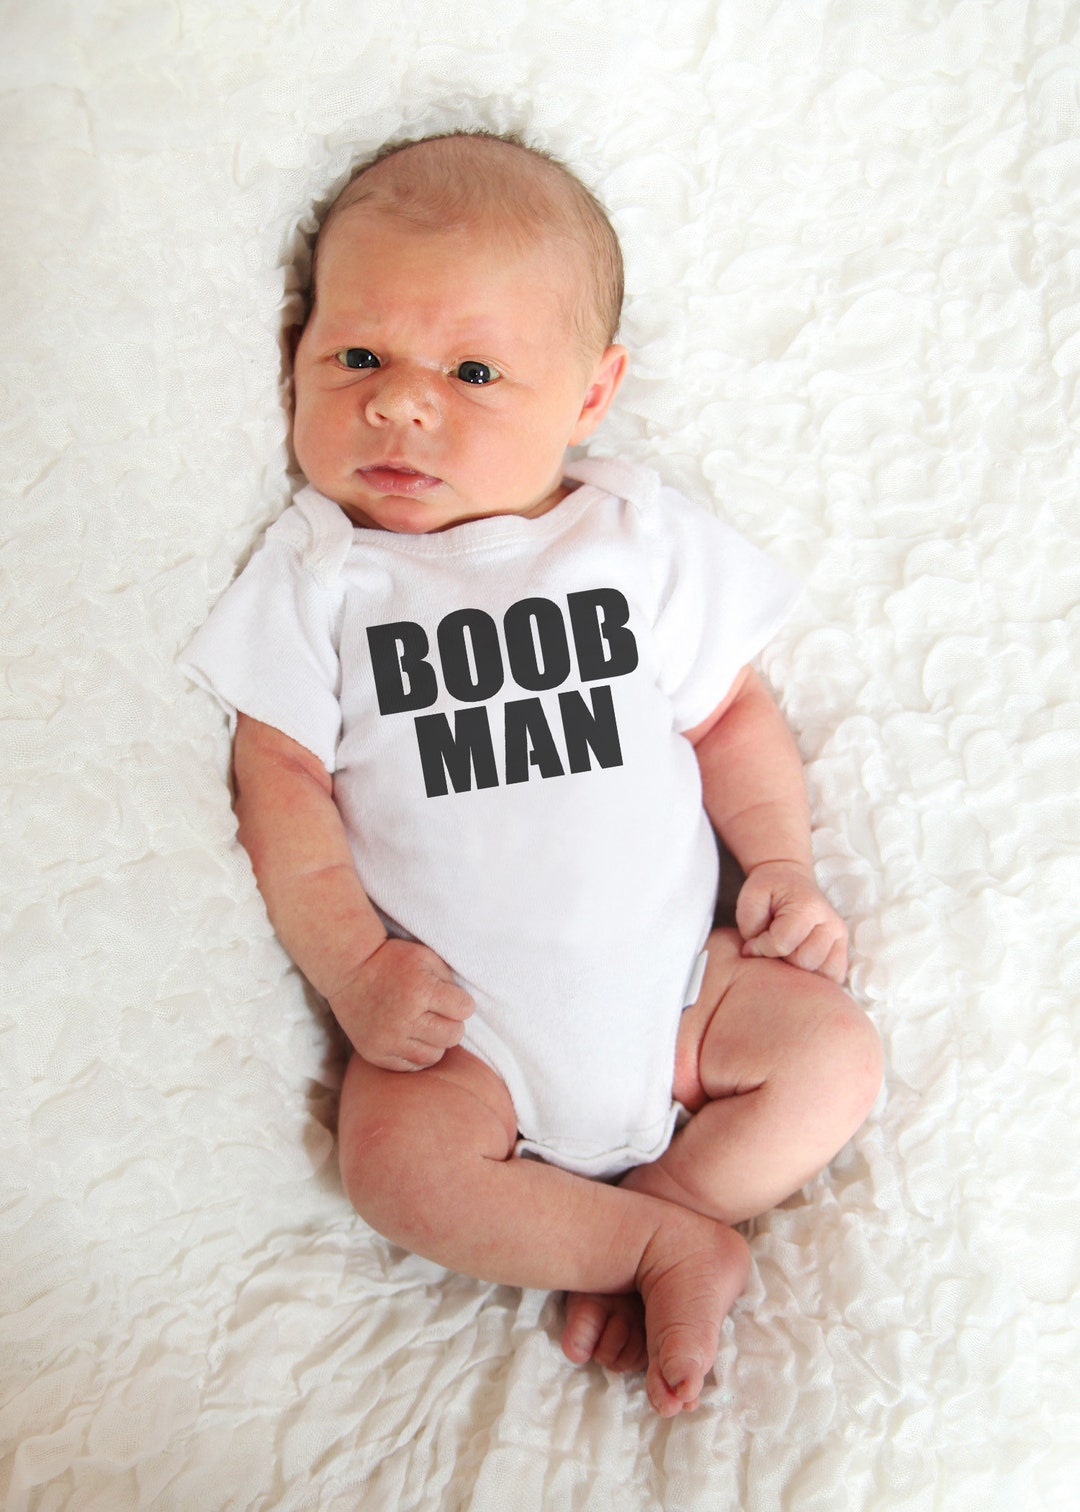 Baby Boy Breastfeeding Shirt I Cry and Her Top Comes off Boy Bodysuit or  Shirt Funny Baby Shirt Baby Bodysuit Breastfeed 